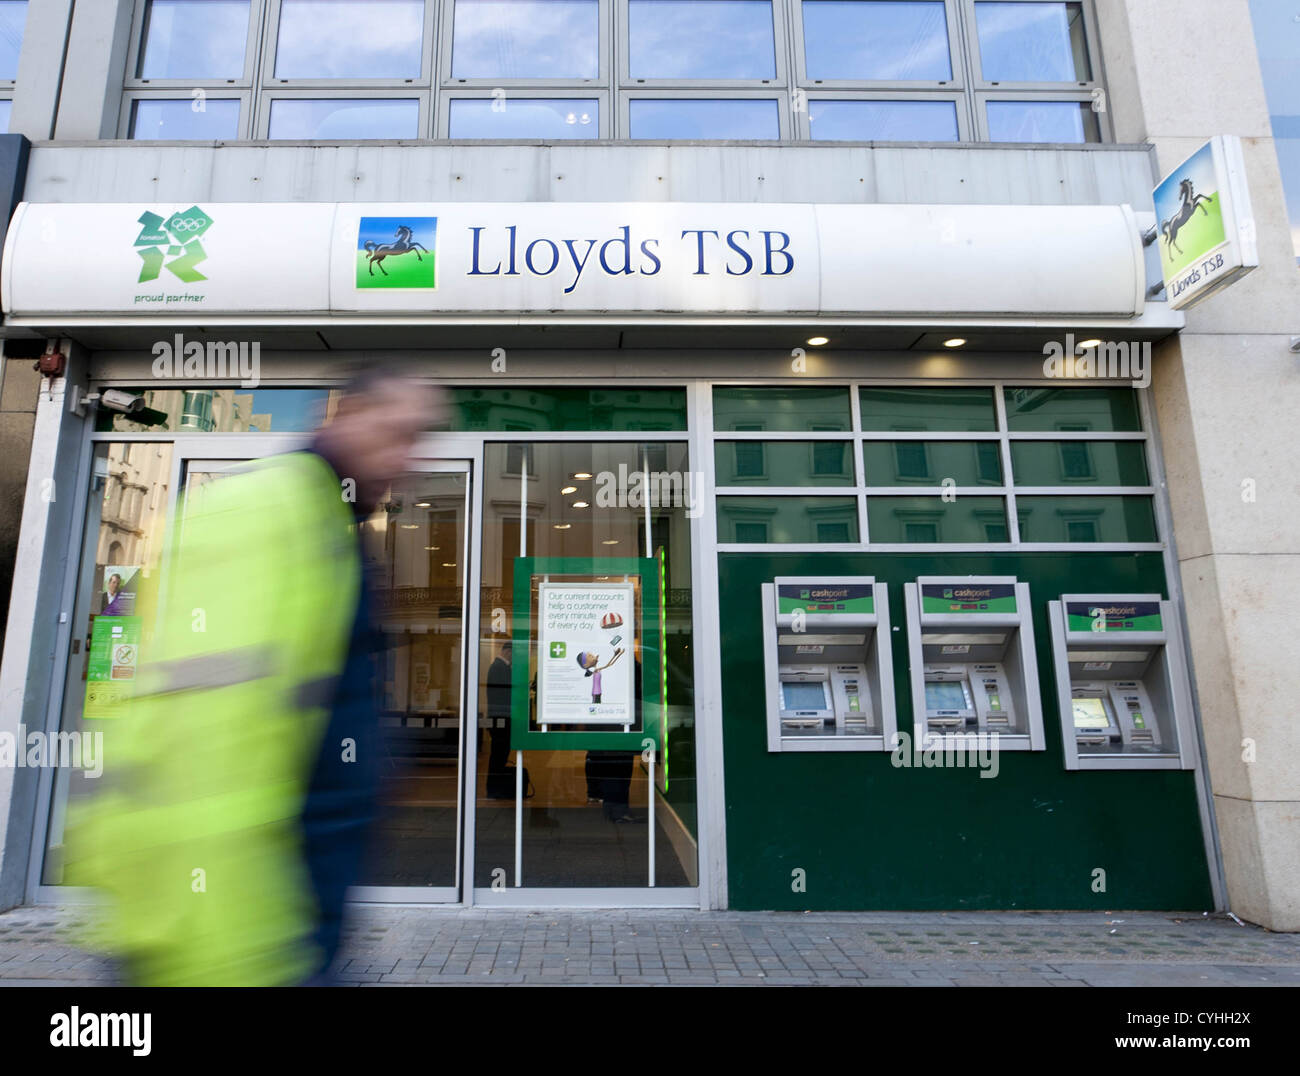 London, UK. 5/11/2012. (Pictured)  Lloyd TSB Bank in London. Peter Barbe / Alamy Stock Photo